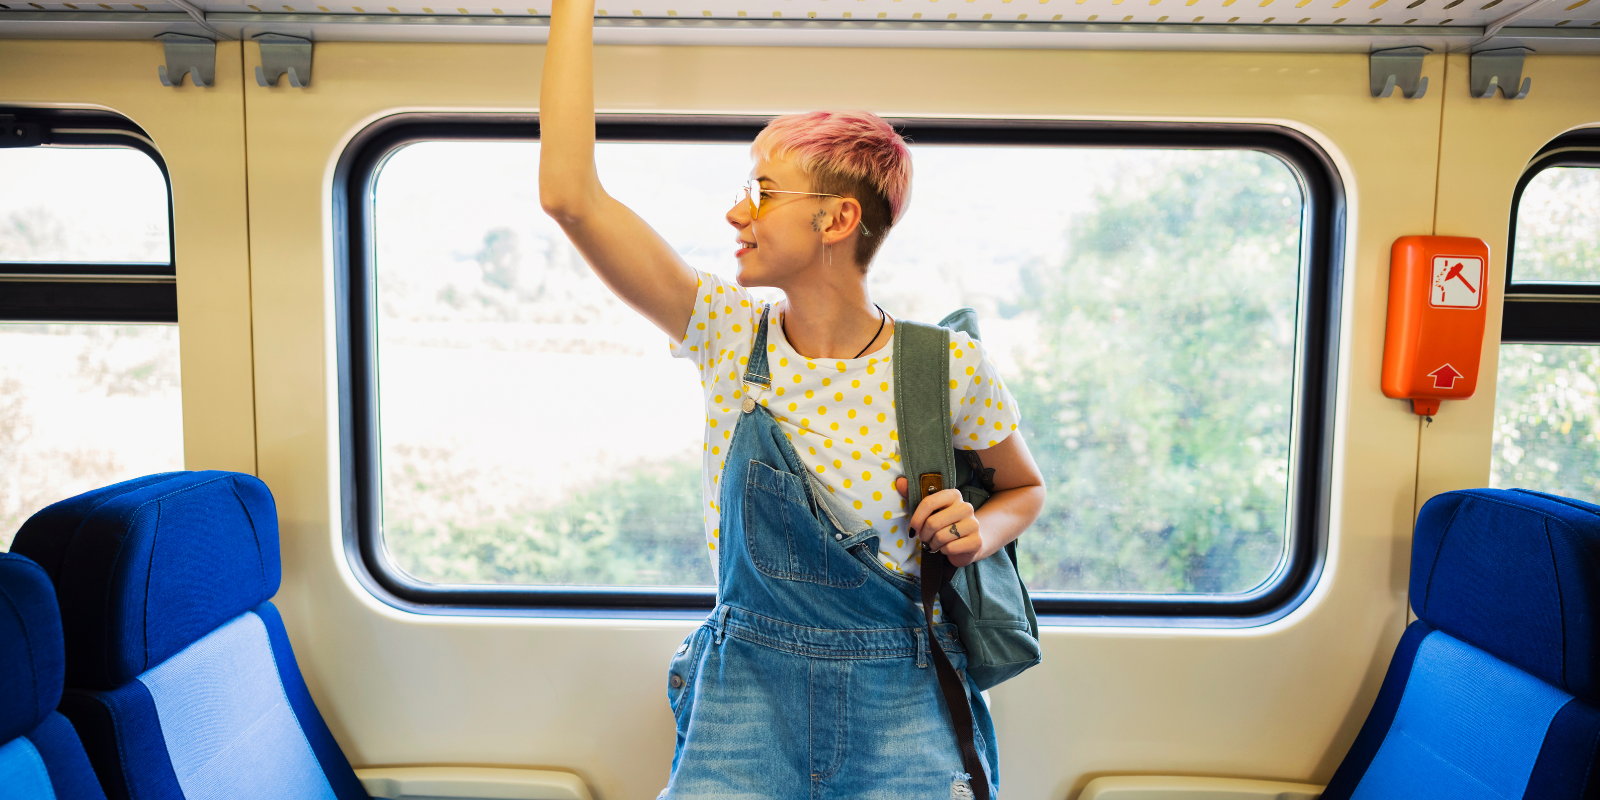 A girl on a train holding the rail above